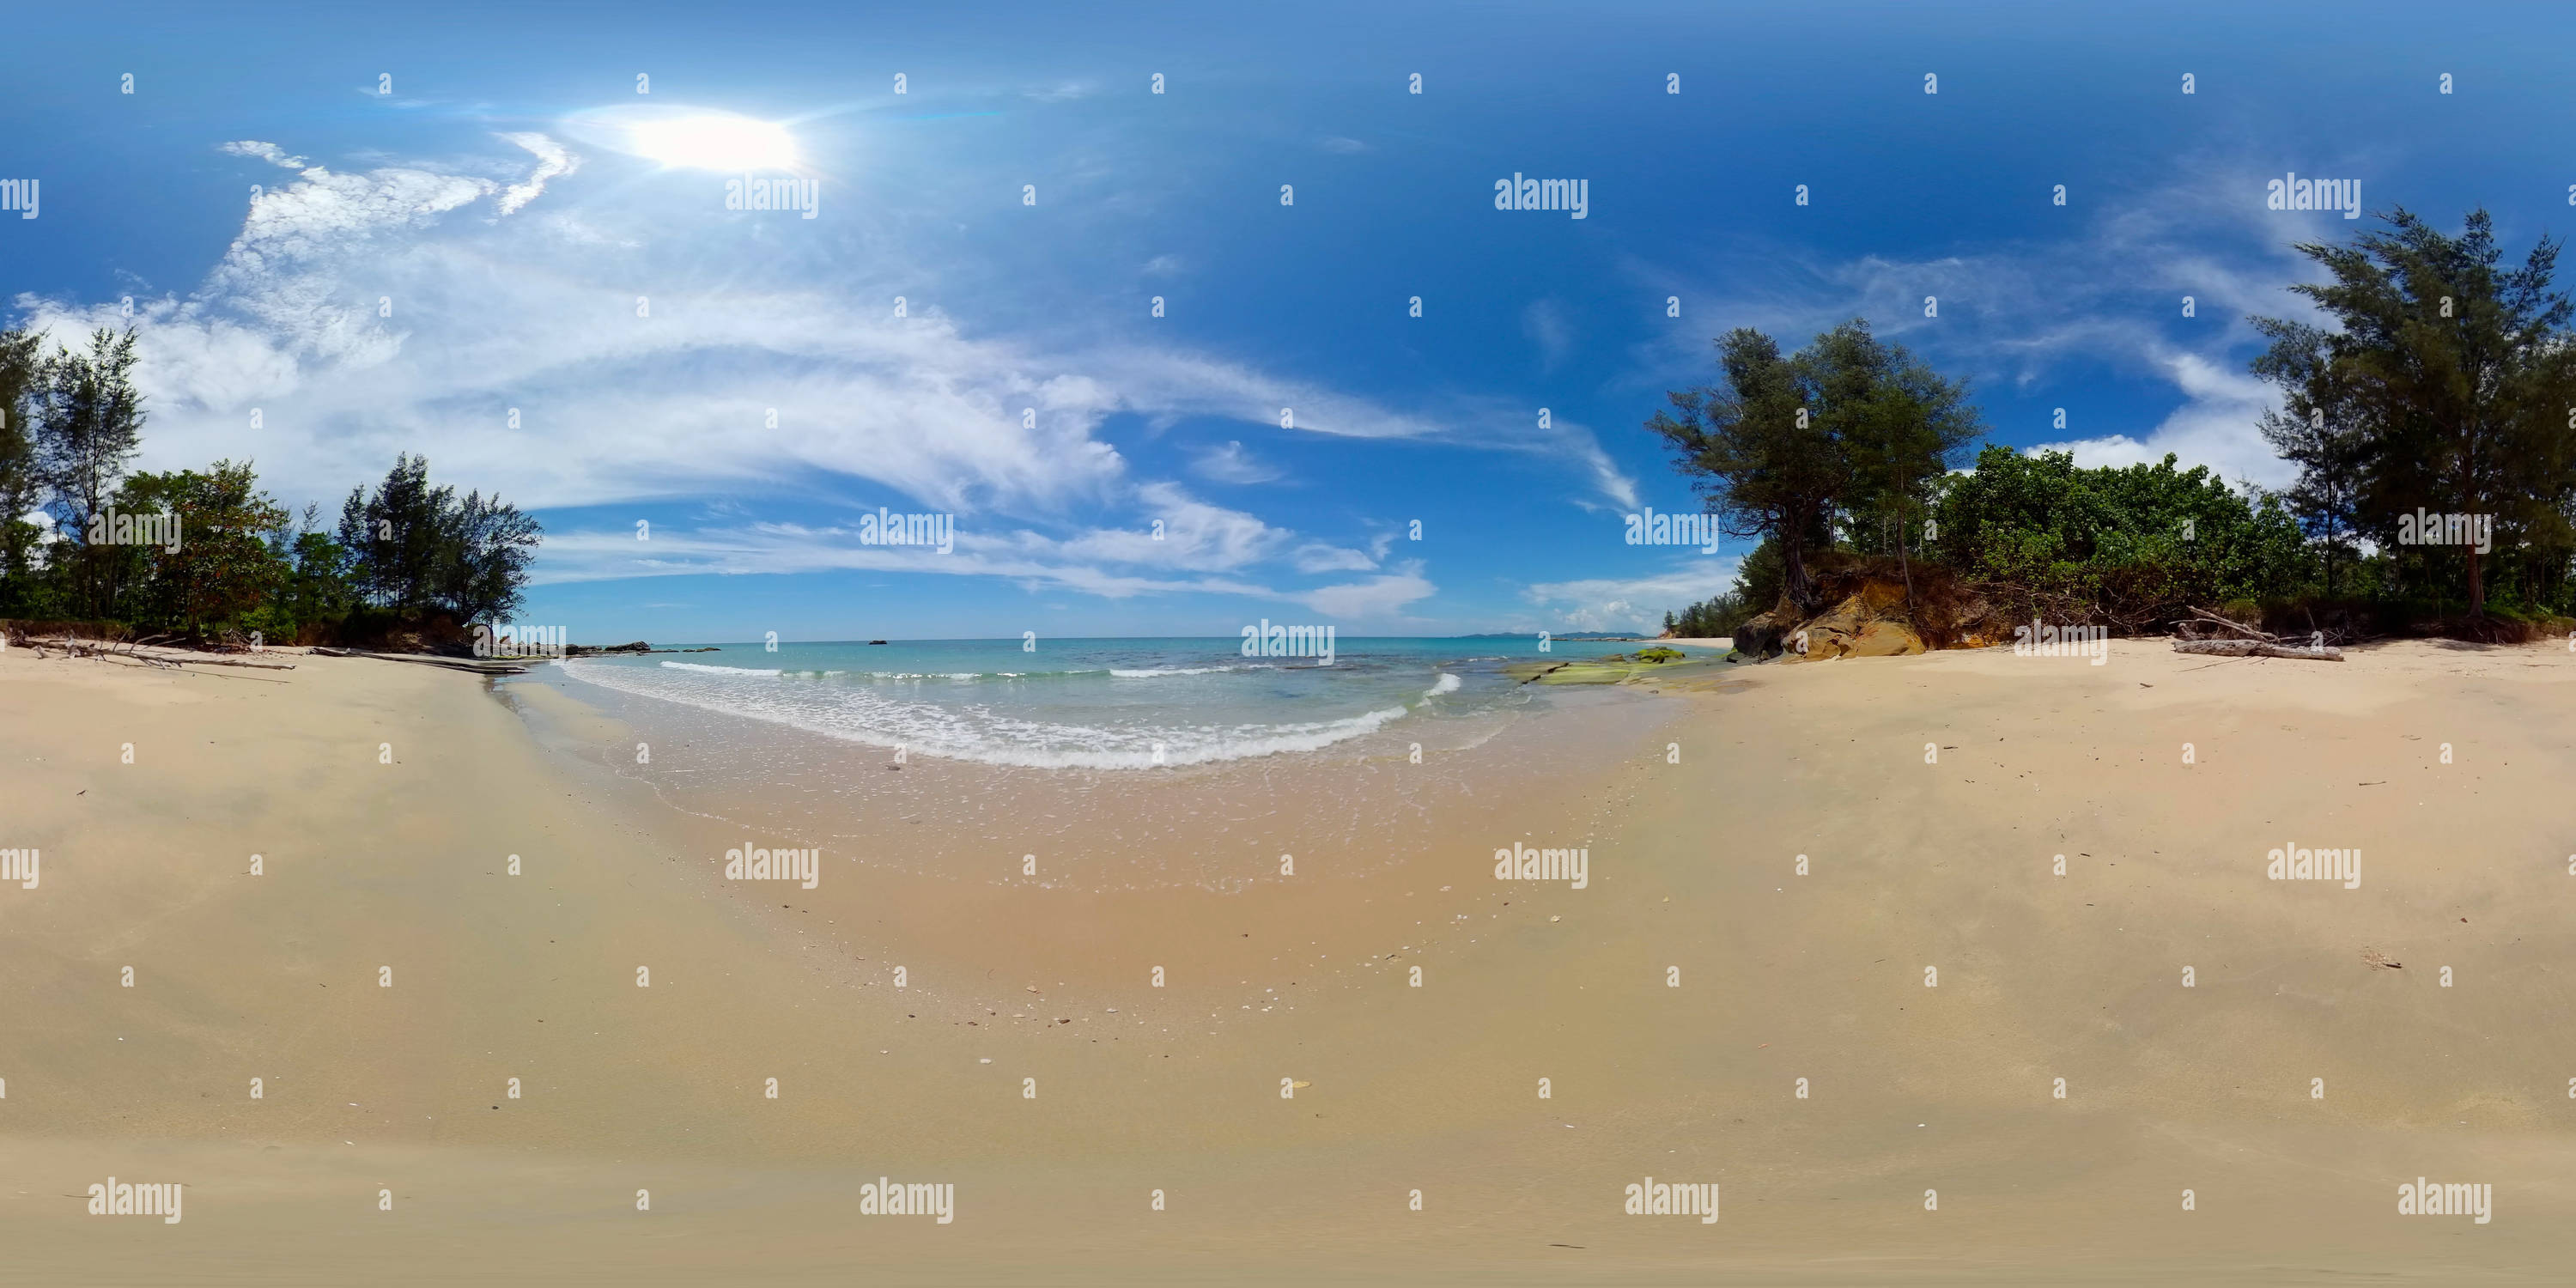 360 degree panoramic view of A tropical beach and a blue ocean.